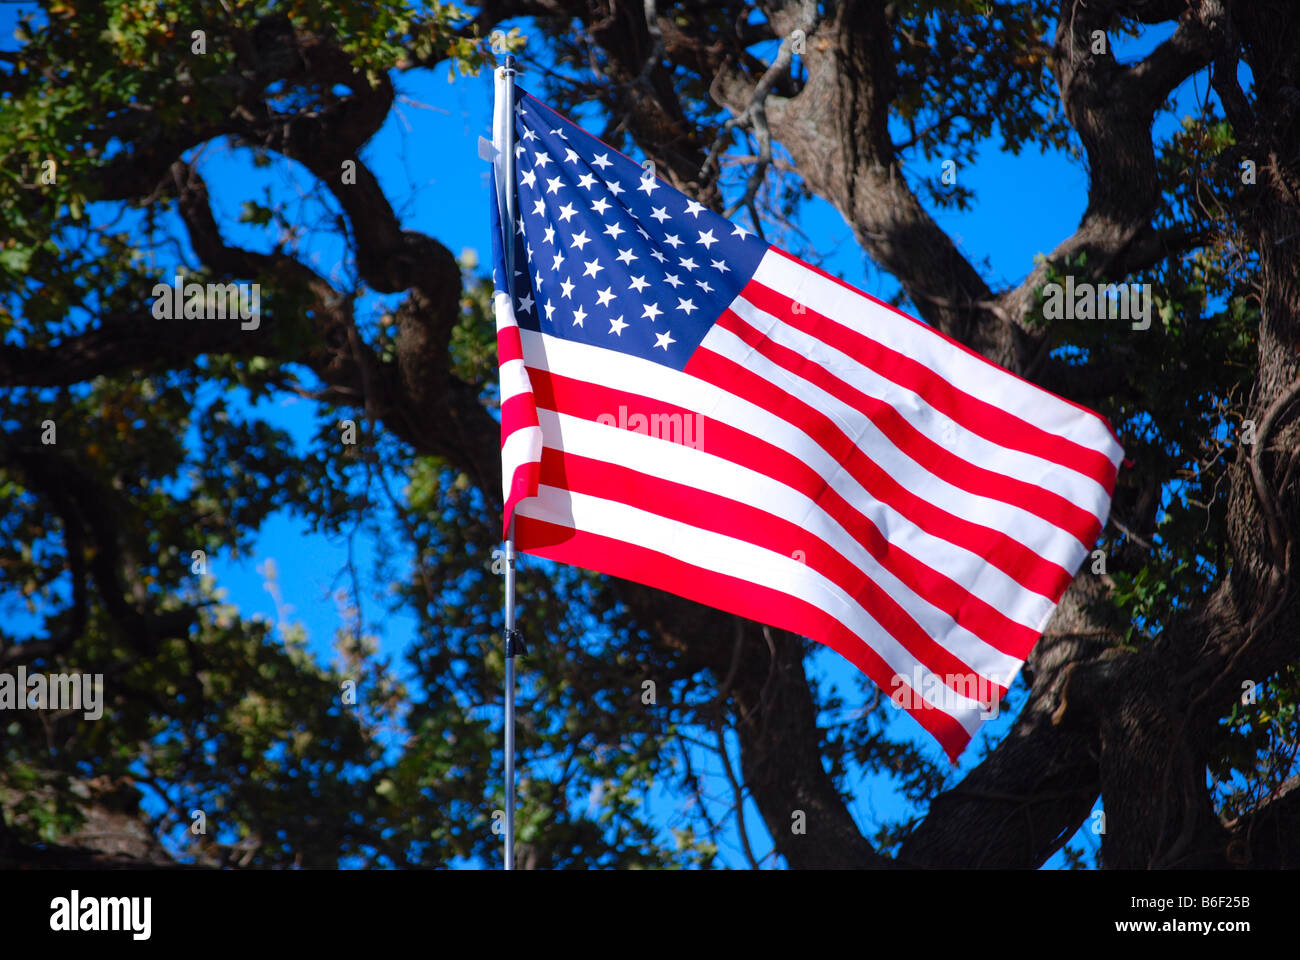 American flag blowing in the wind with trees in the background Stock Photo